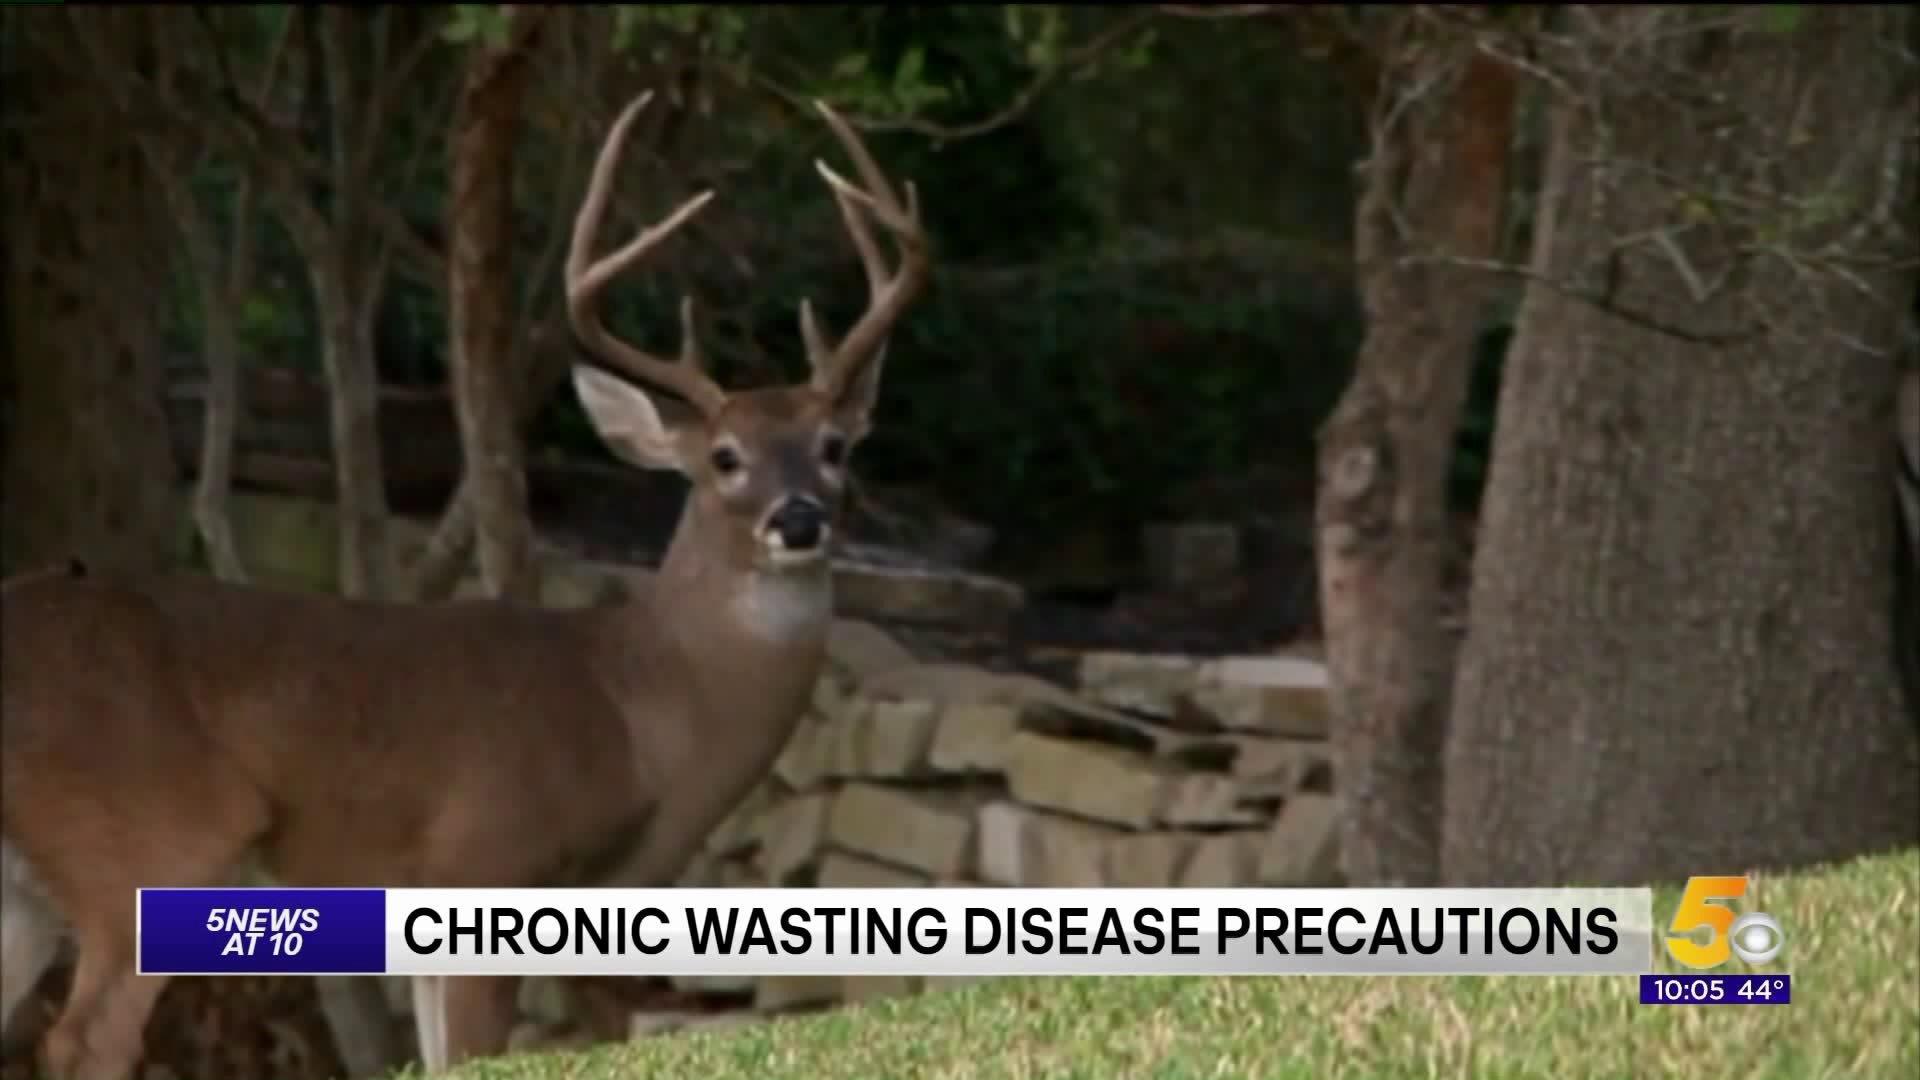 Experts Warn About Chronic Wasting Disease In Arkansas Deer